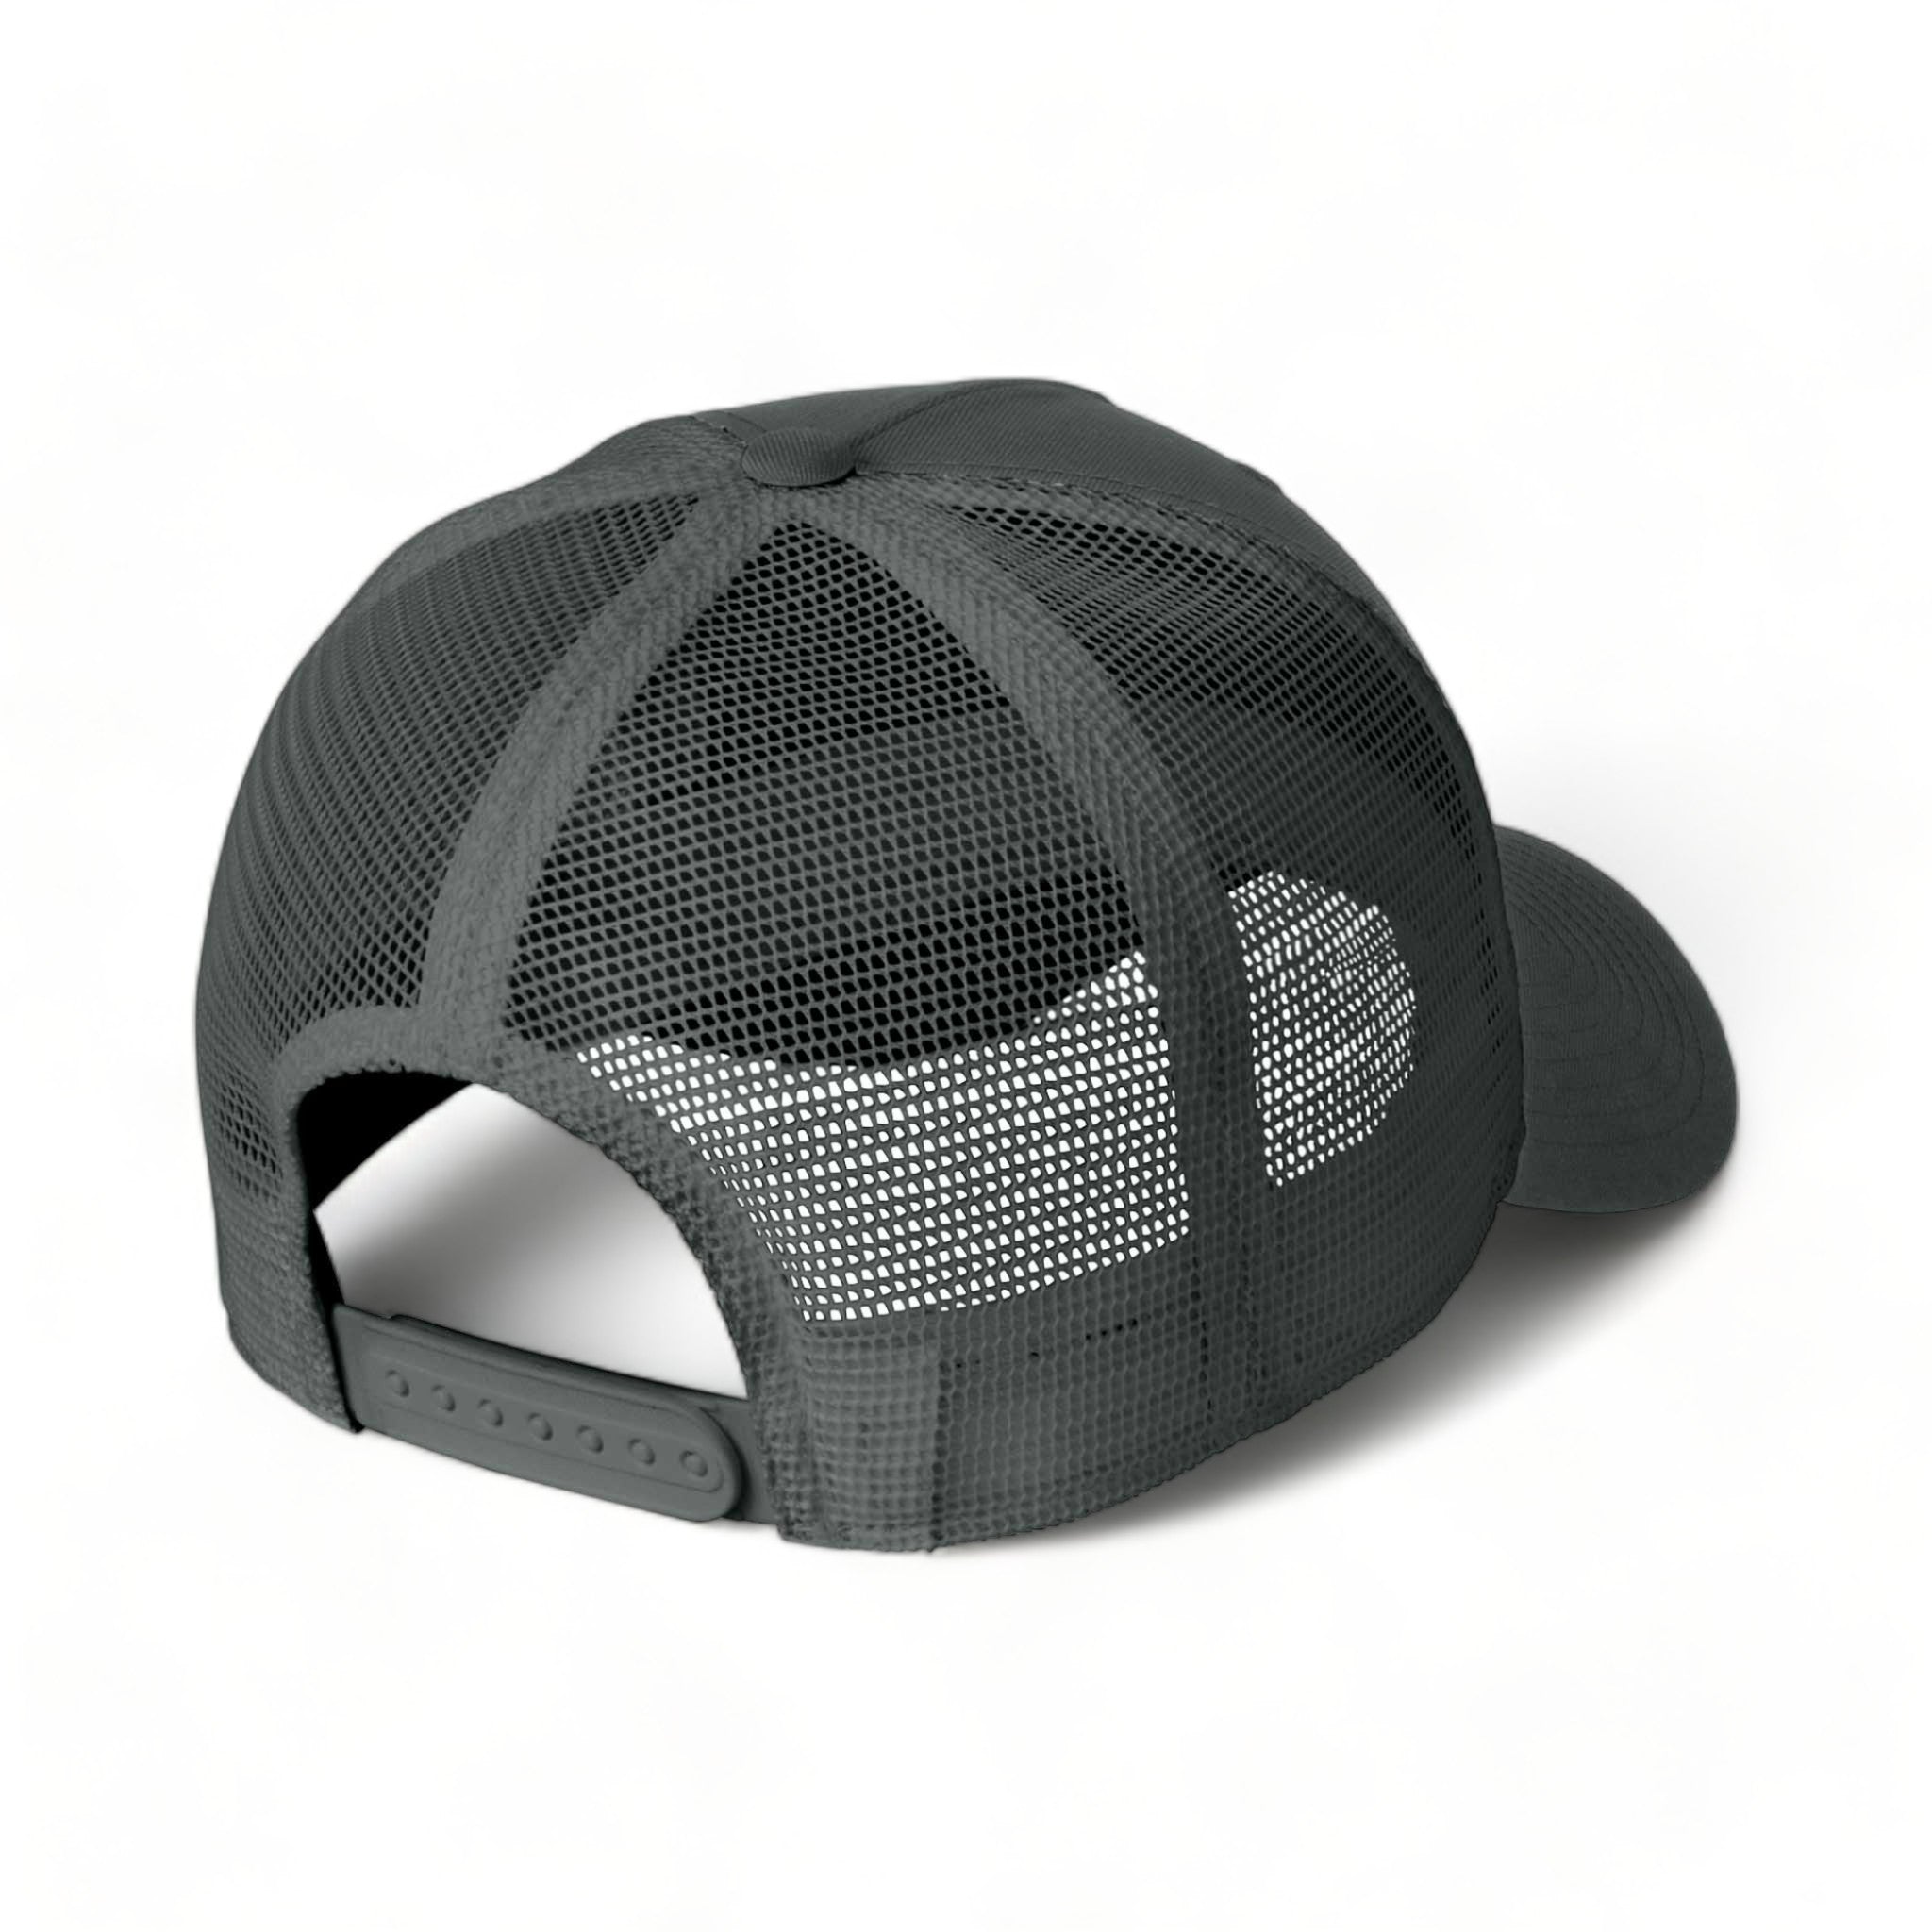 Back view of Nike NKFN9893 custom hat in anthracite and anthracite